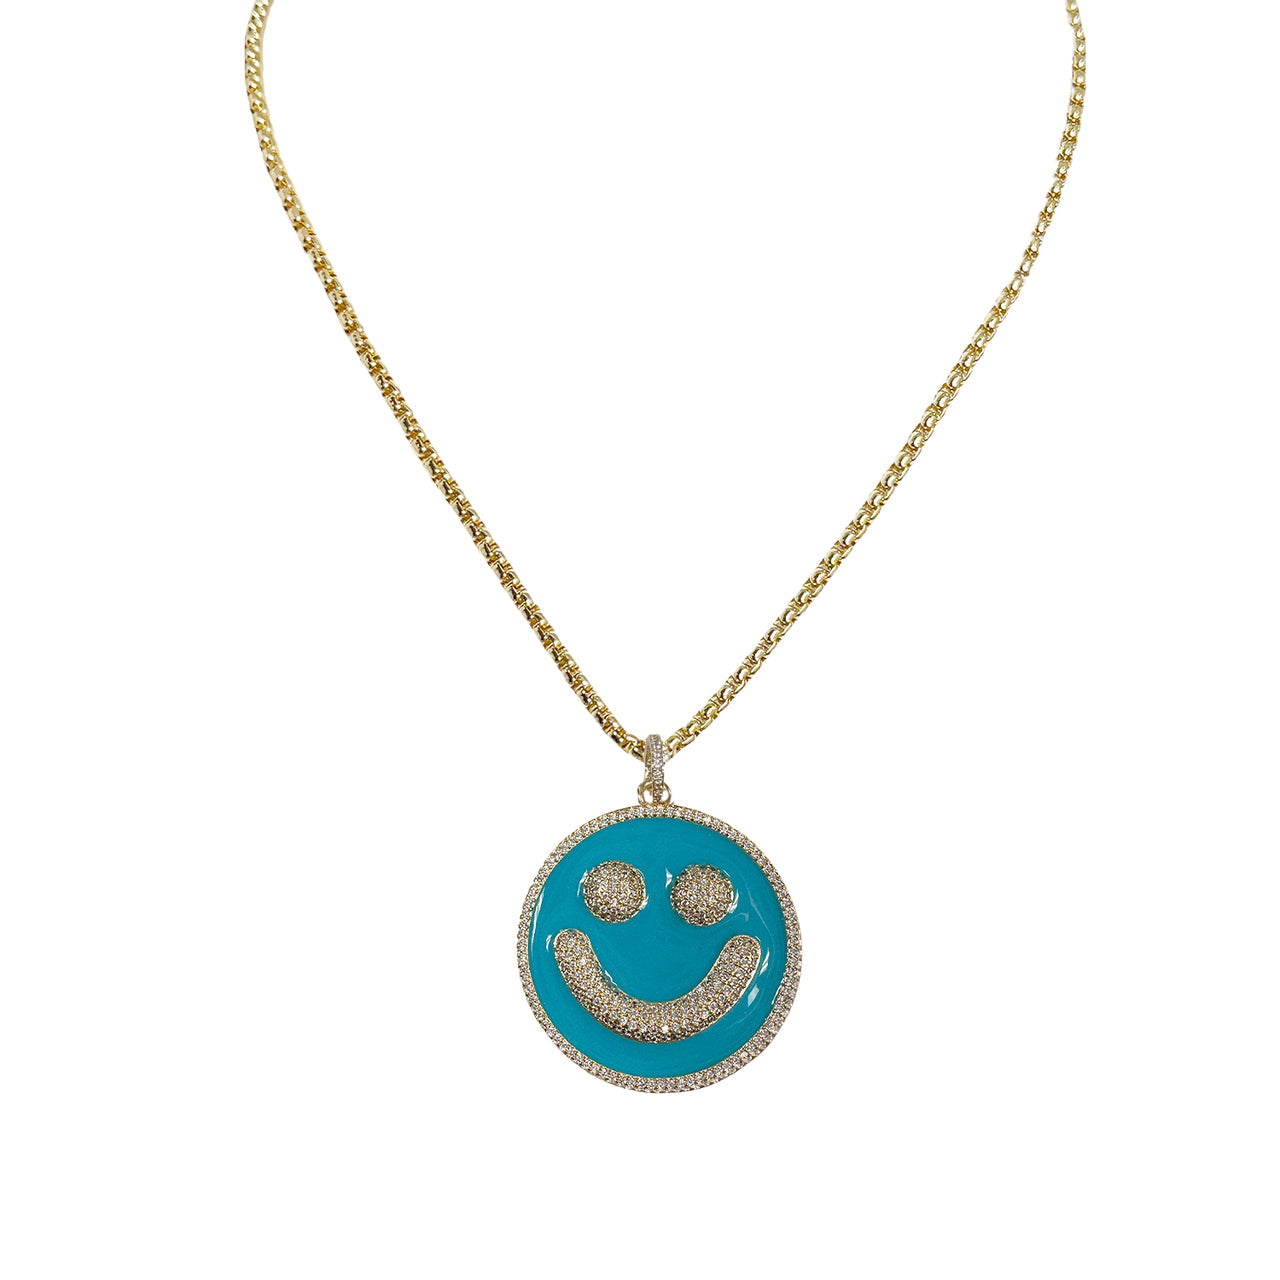 Hanna Be Happy Smile Necklace